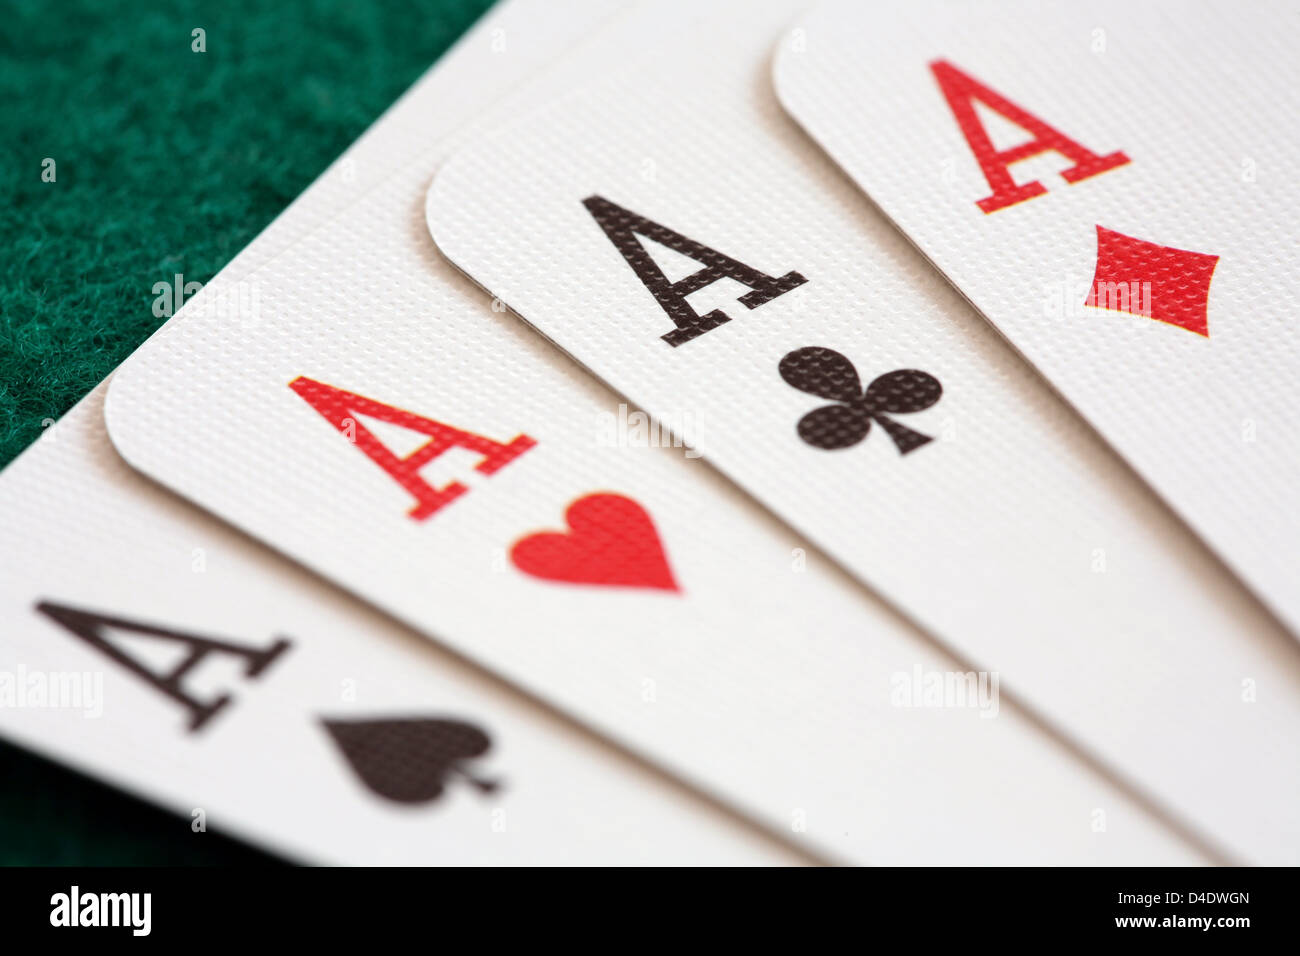 Close-up of four playing cards showing aces. Stock Photo